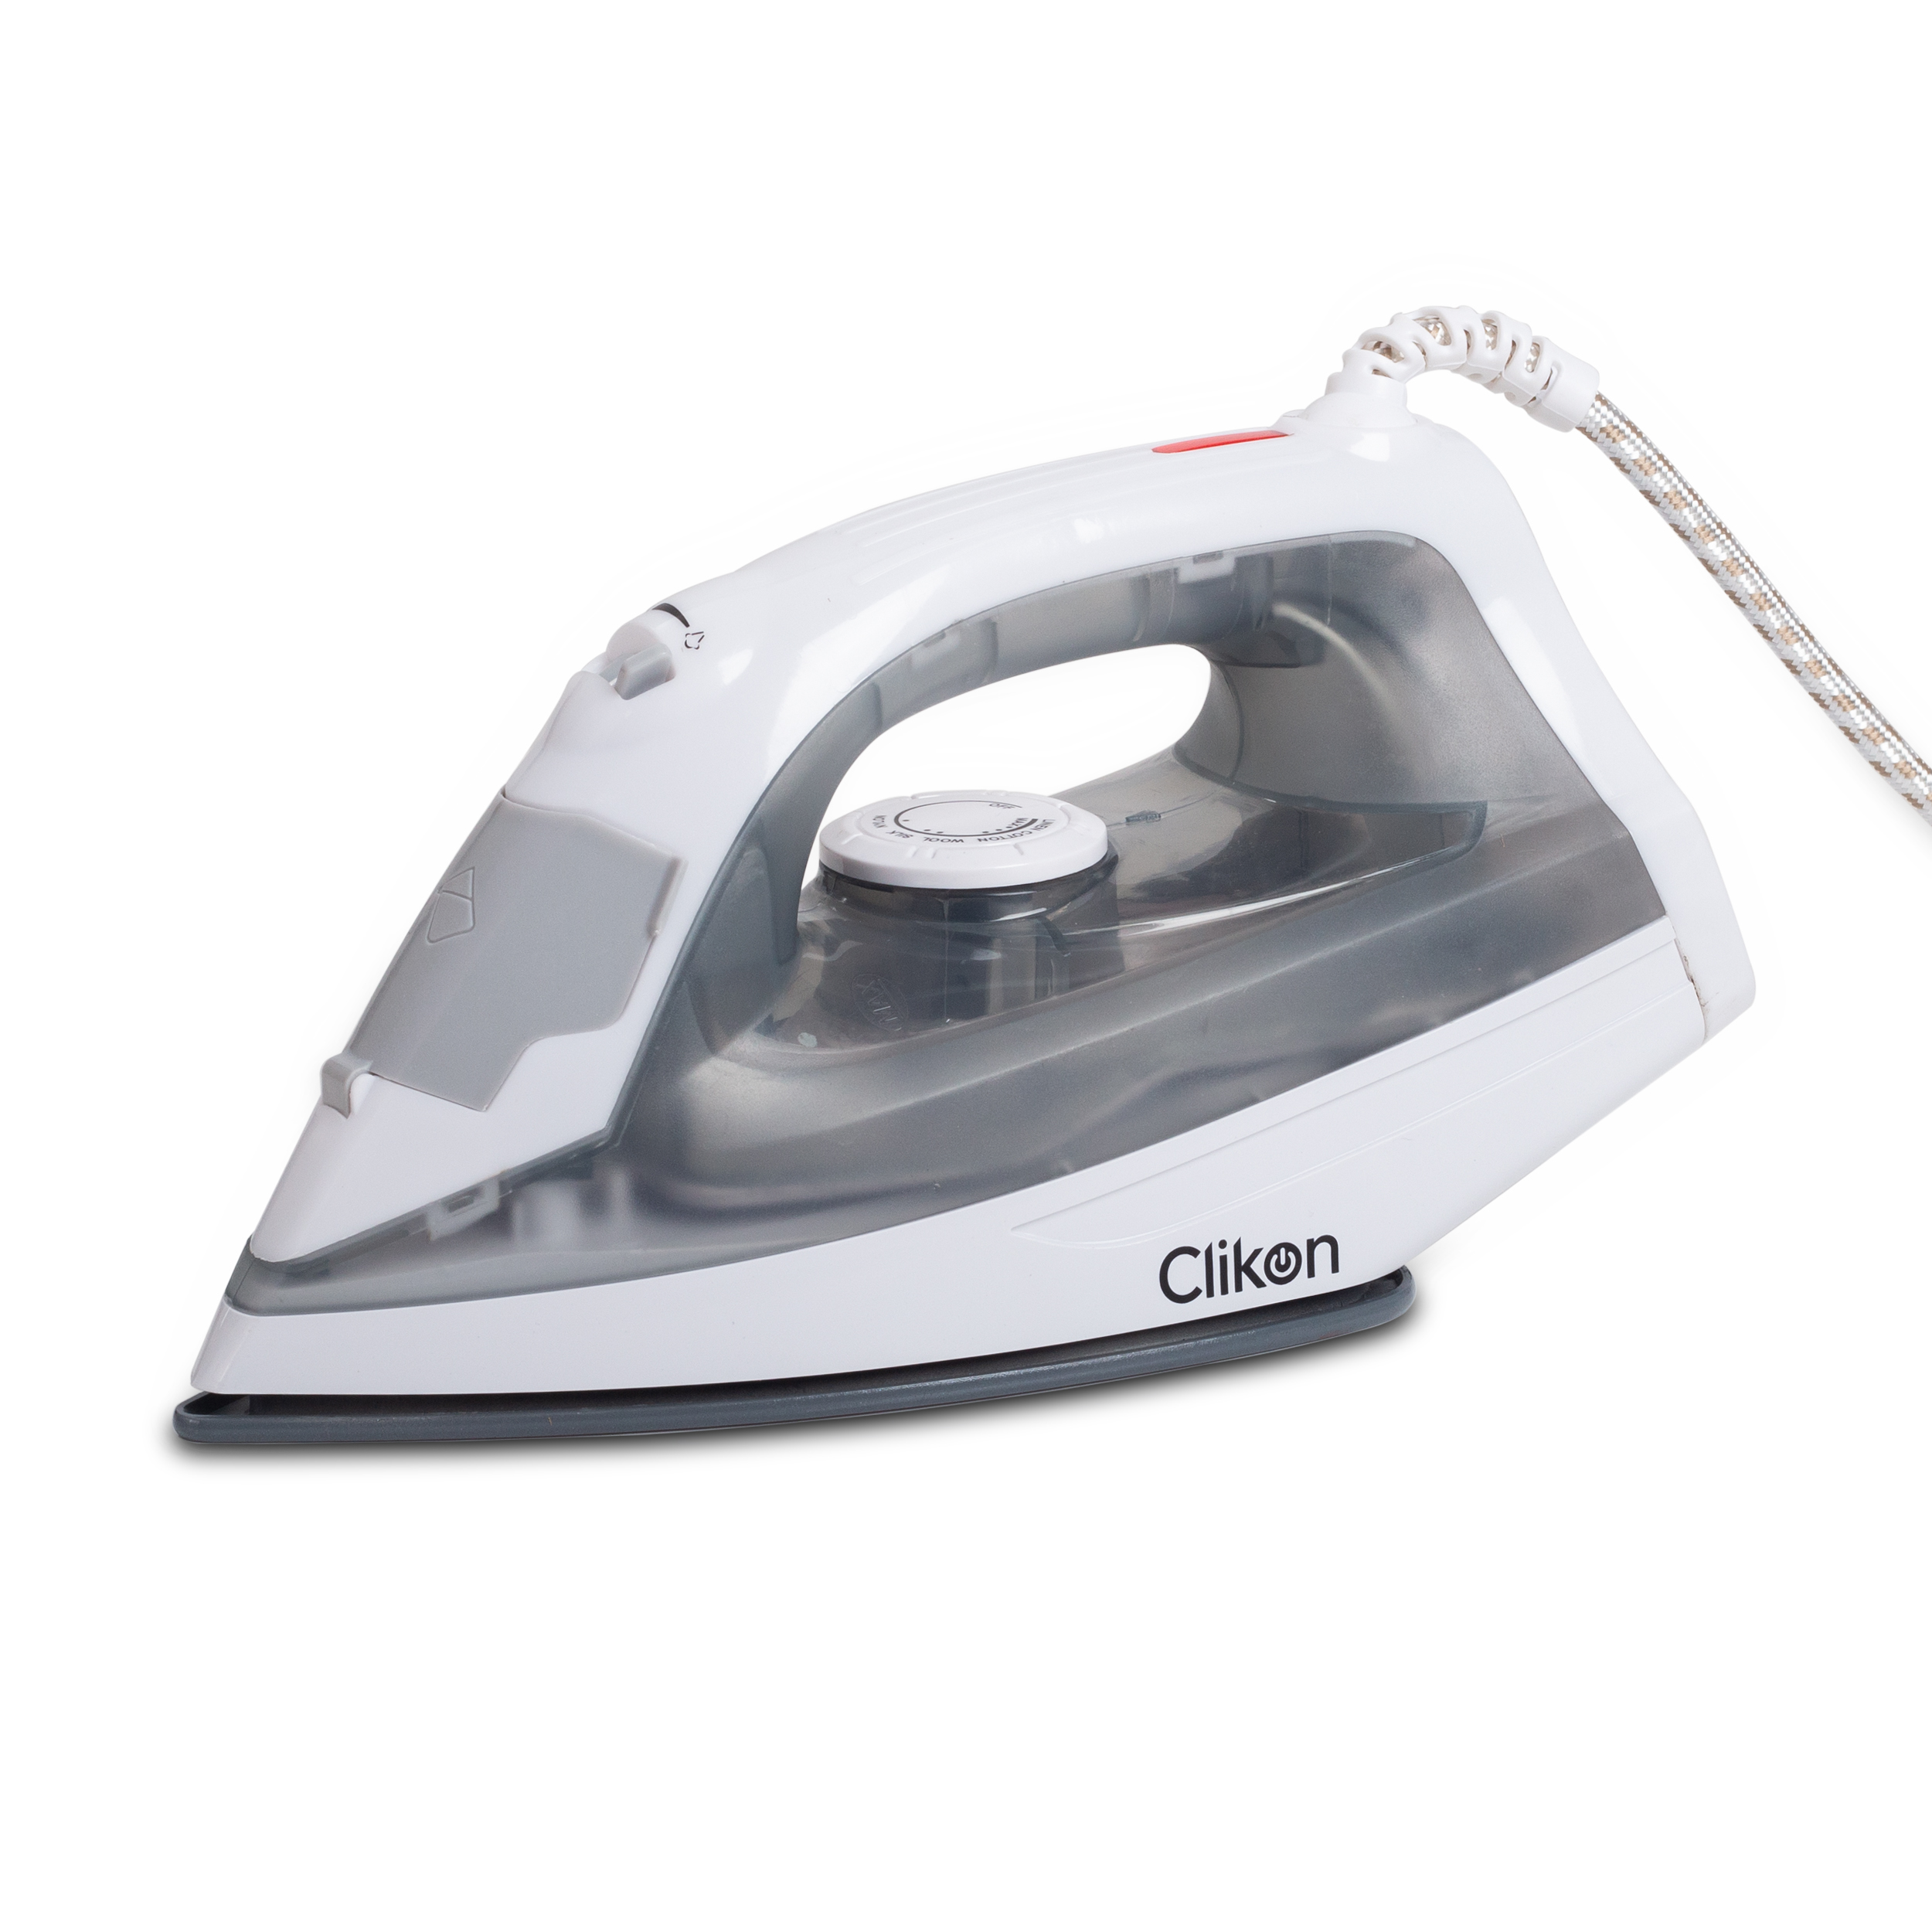 Clikon Steam Iron Box With Non-Stick Soleplate & Self Clean Function -Ck4130